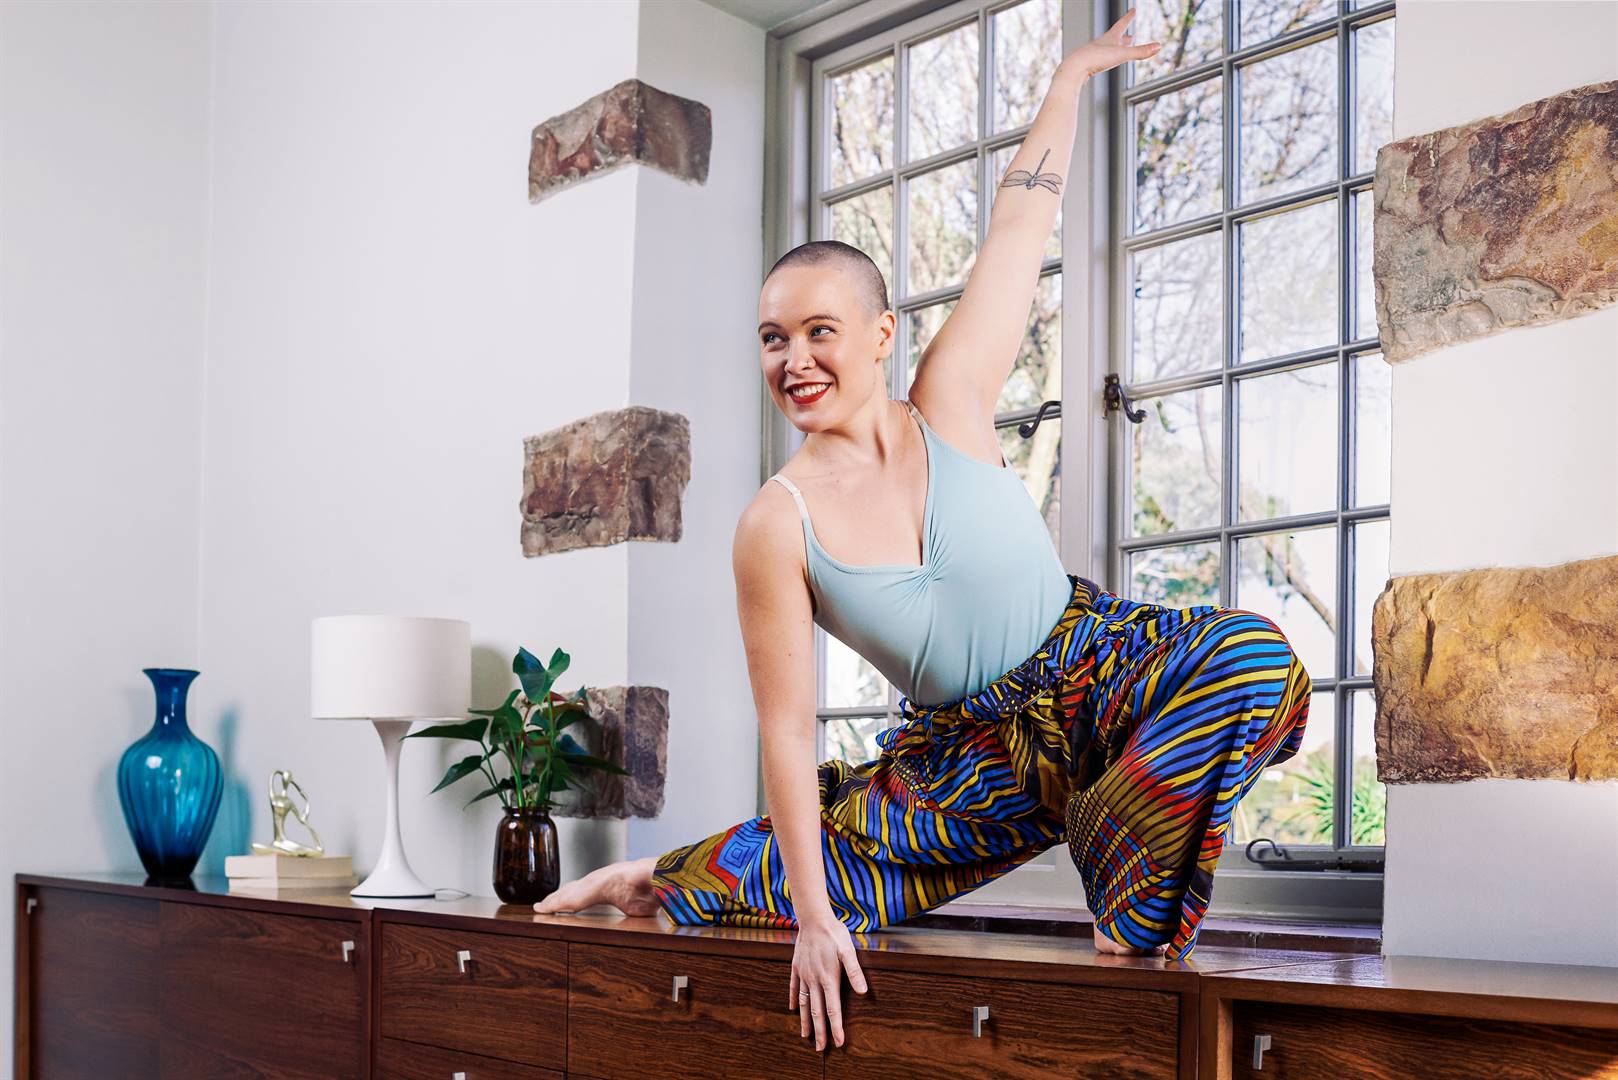 Kristi-Leigh Gresse tells us more about how dance has shaped her life, Photo: Supplied